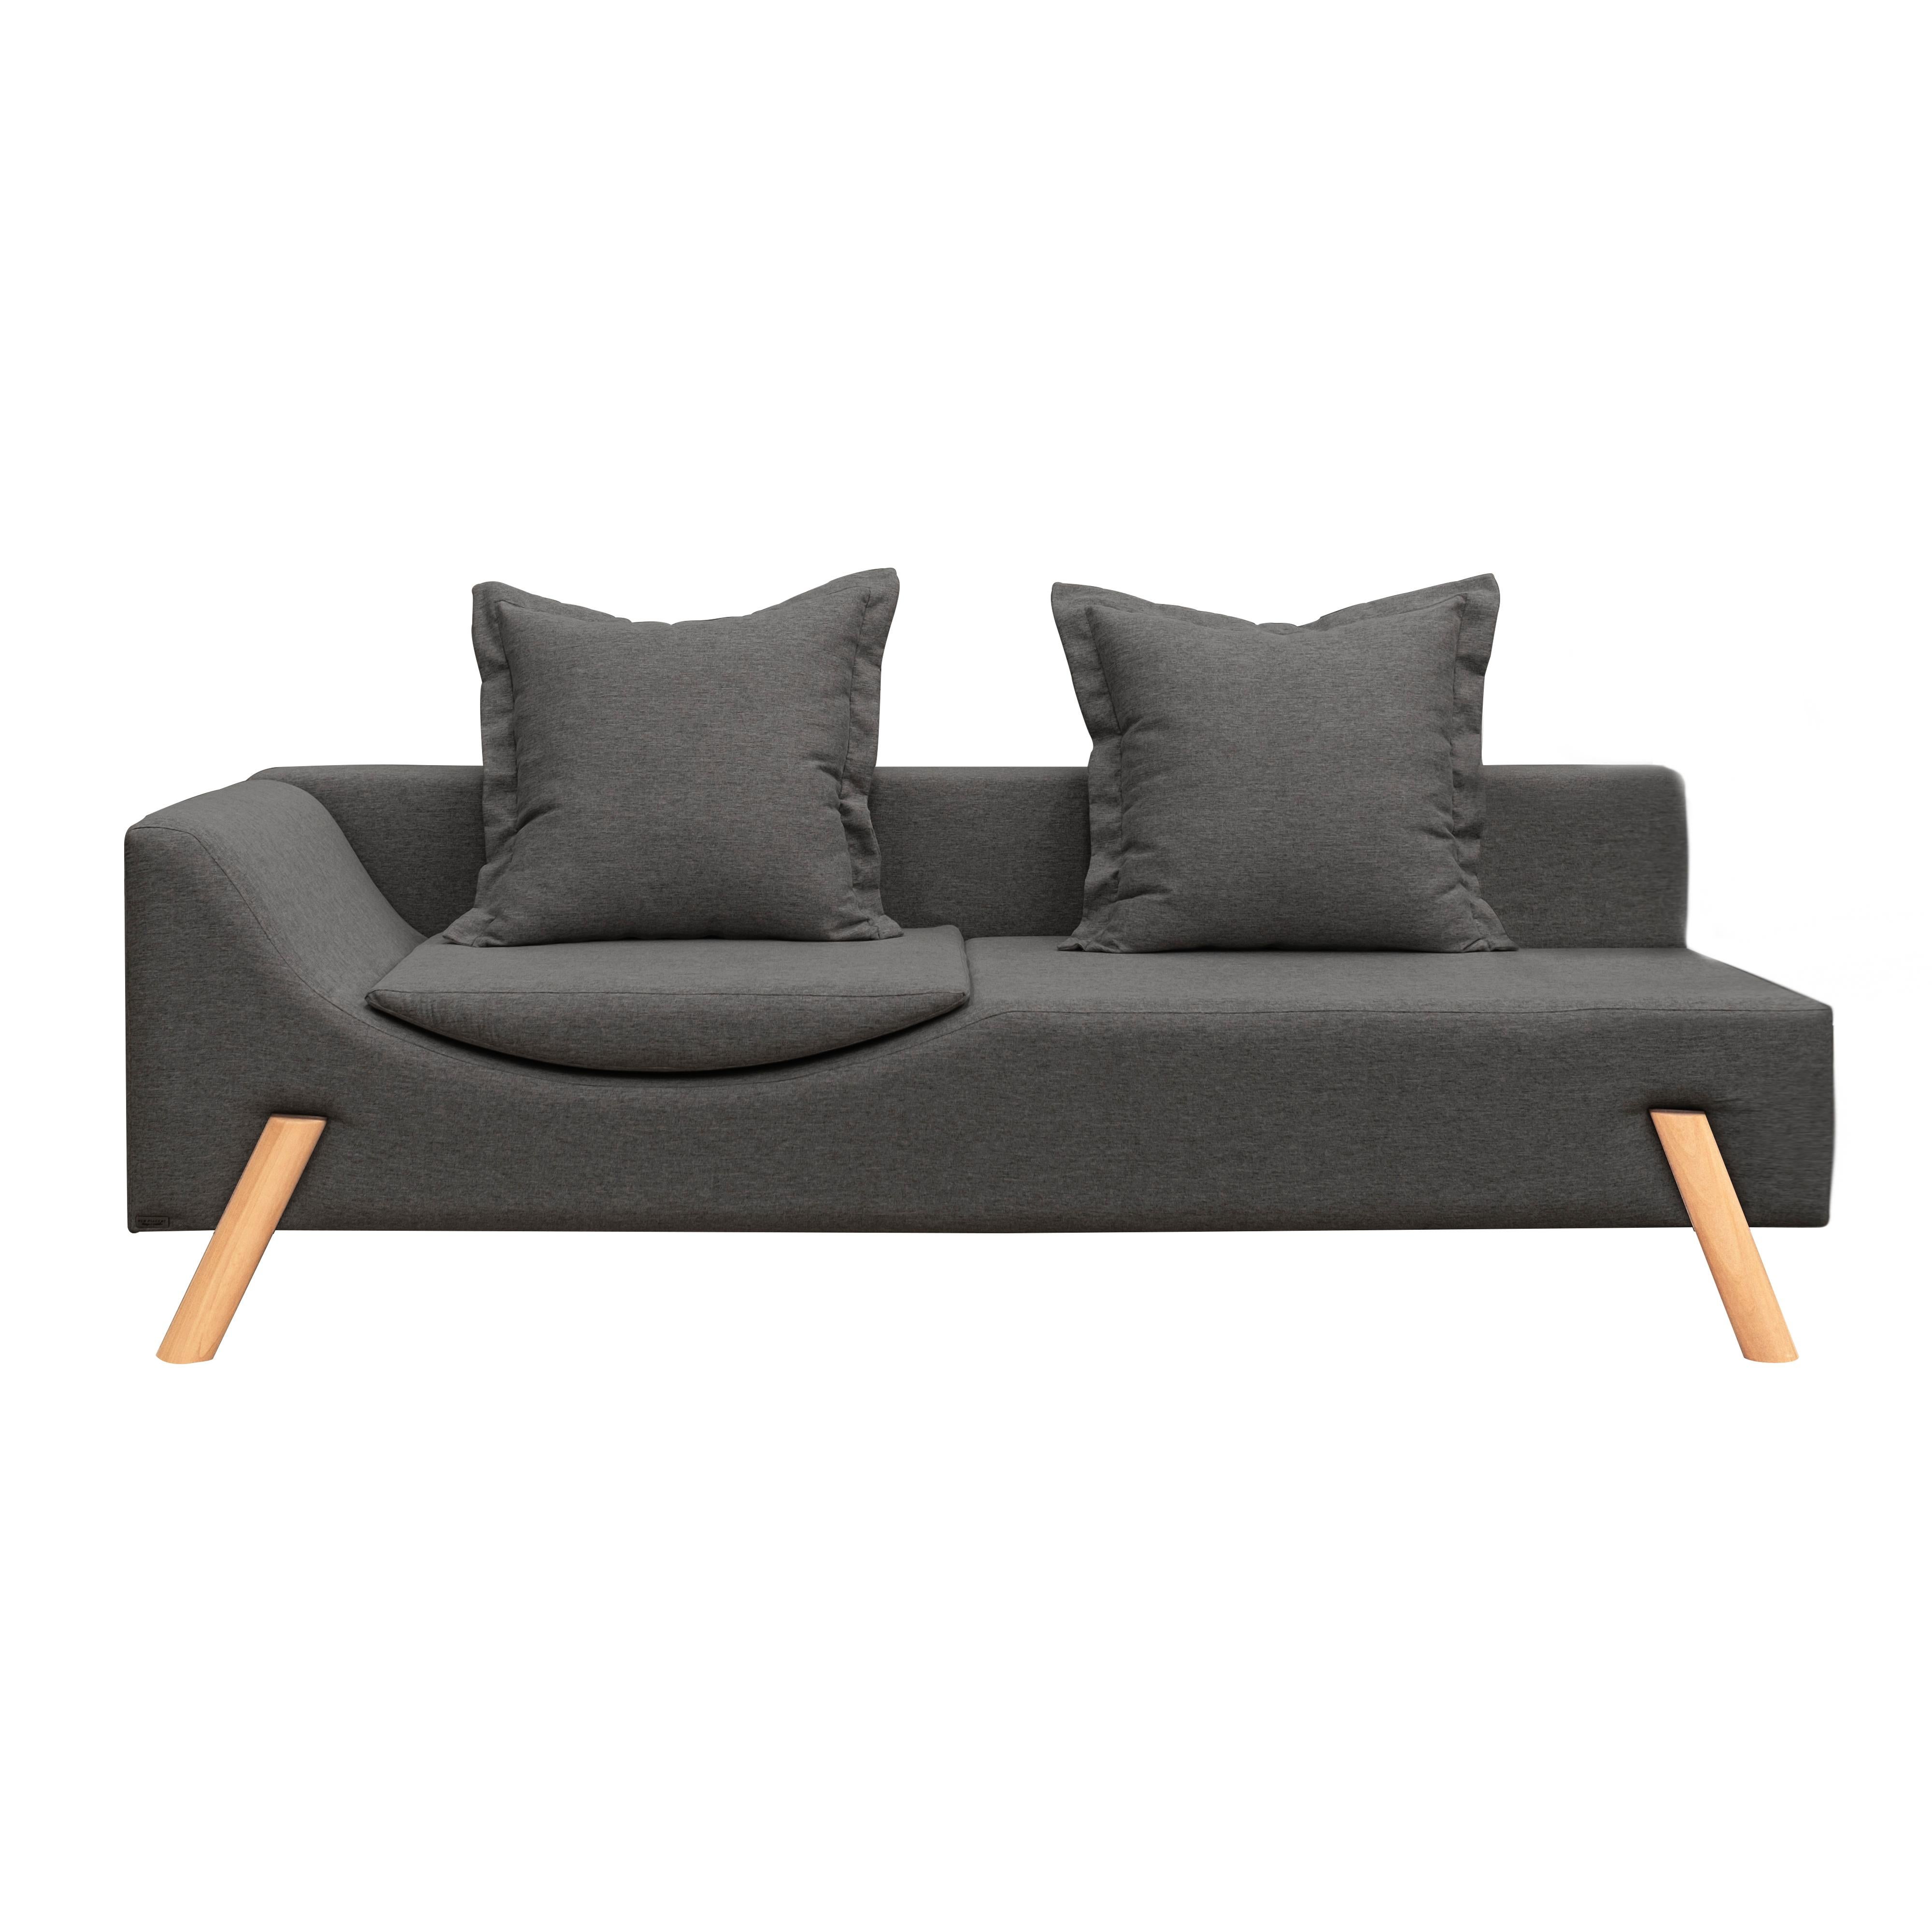 The Flag Couch is a smart and multifunctional piece.
The couch has a cushion built into the seat that makes the piece with dual functionality: when is closed, it works as a comfortable living sofa to seat, and when is opened it becomes a chaise